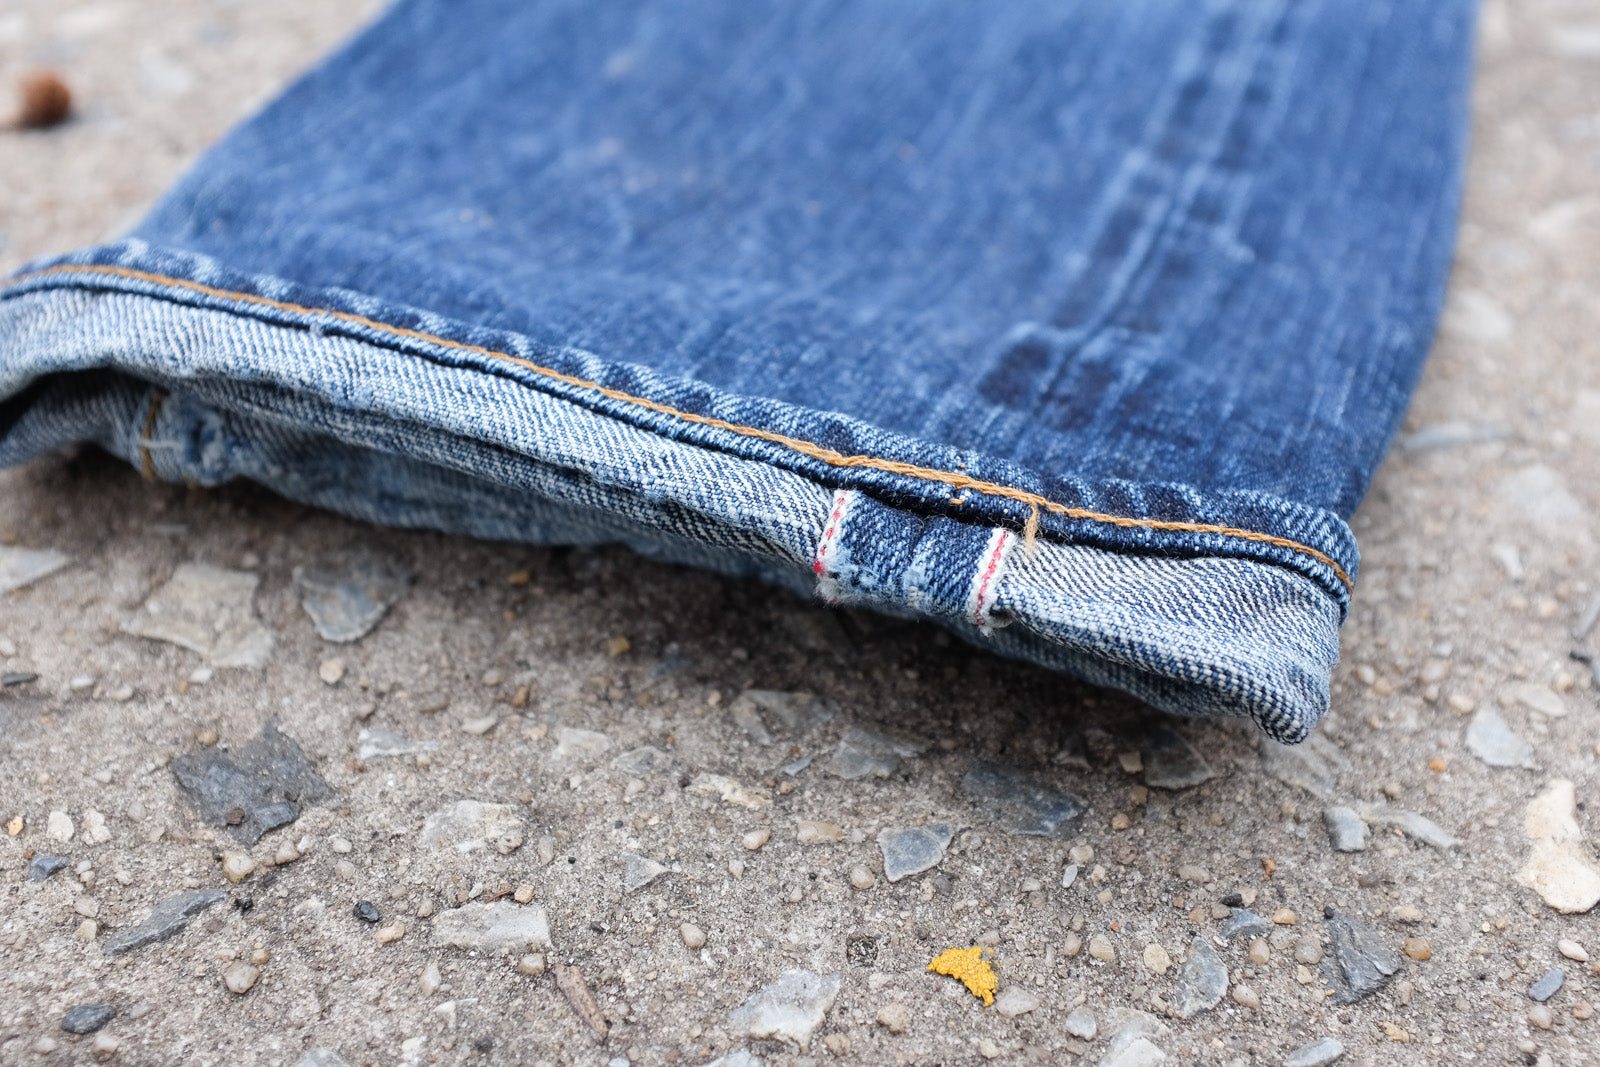 Detail shot of upturned denim cuff displaying slight fraying and selvedge ID.